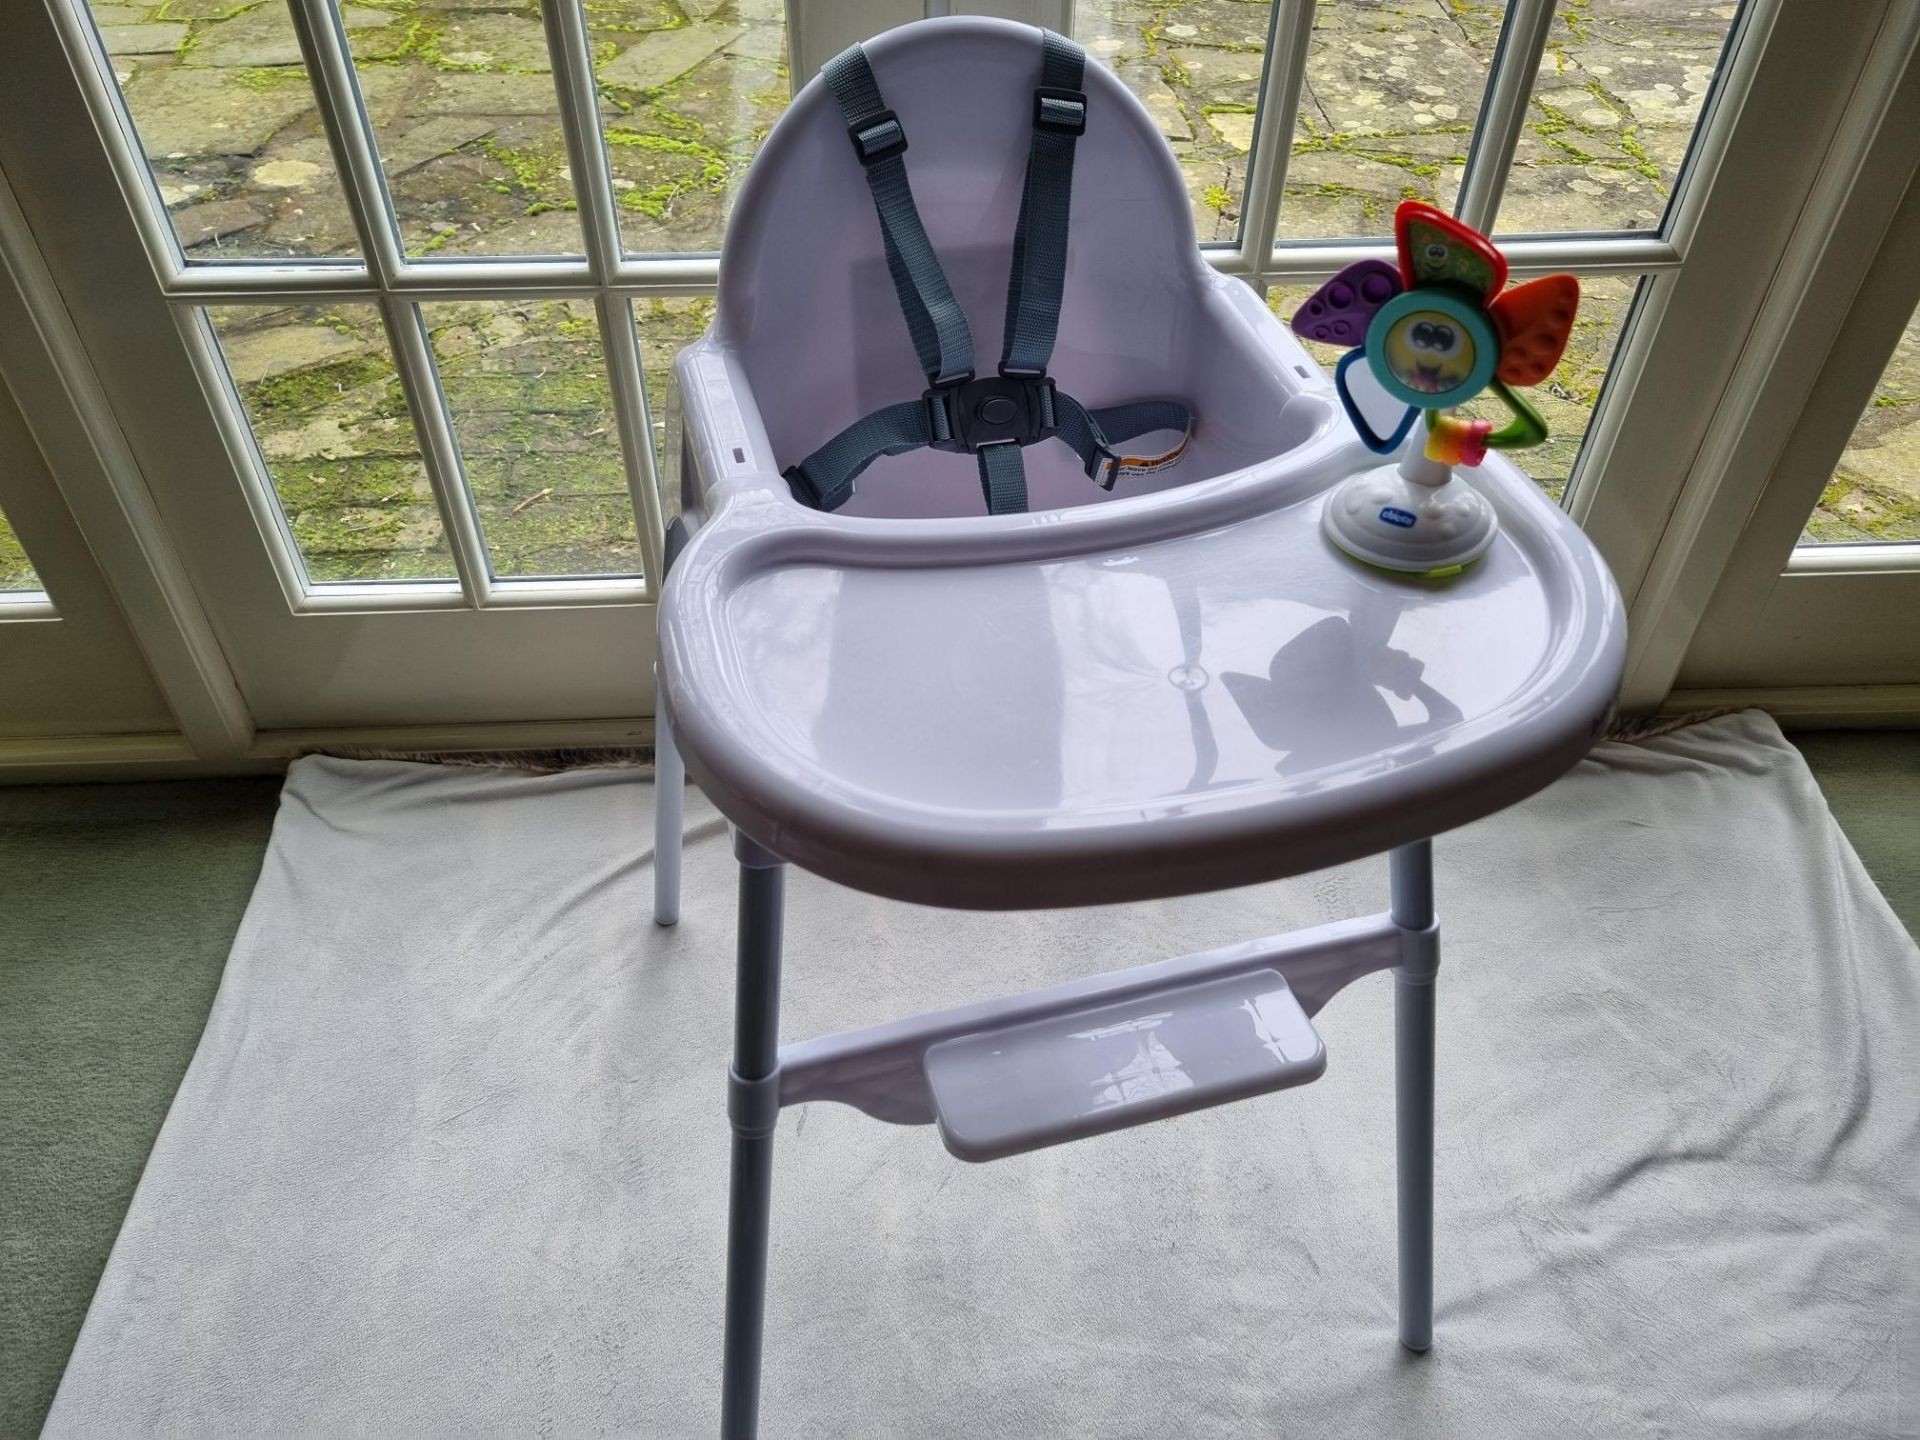 Hauck Disney Pushchair Travel System, Highchair, Tommee Tippee bottle warmer and case, playmat, toys - Image 15 of 24